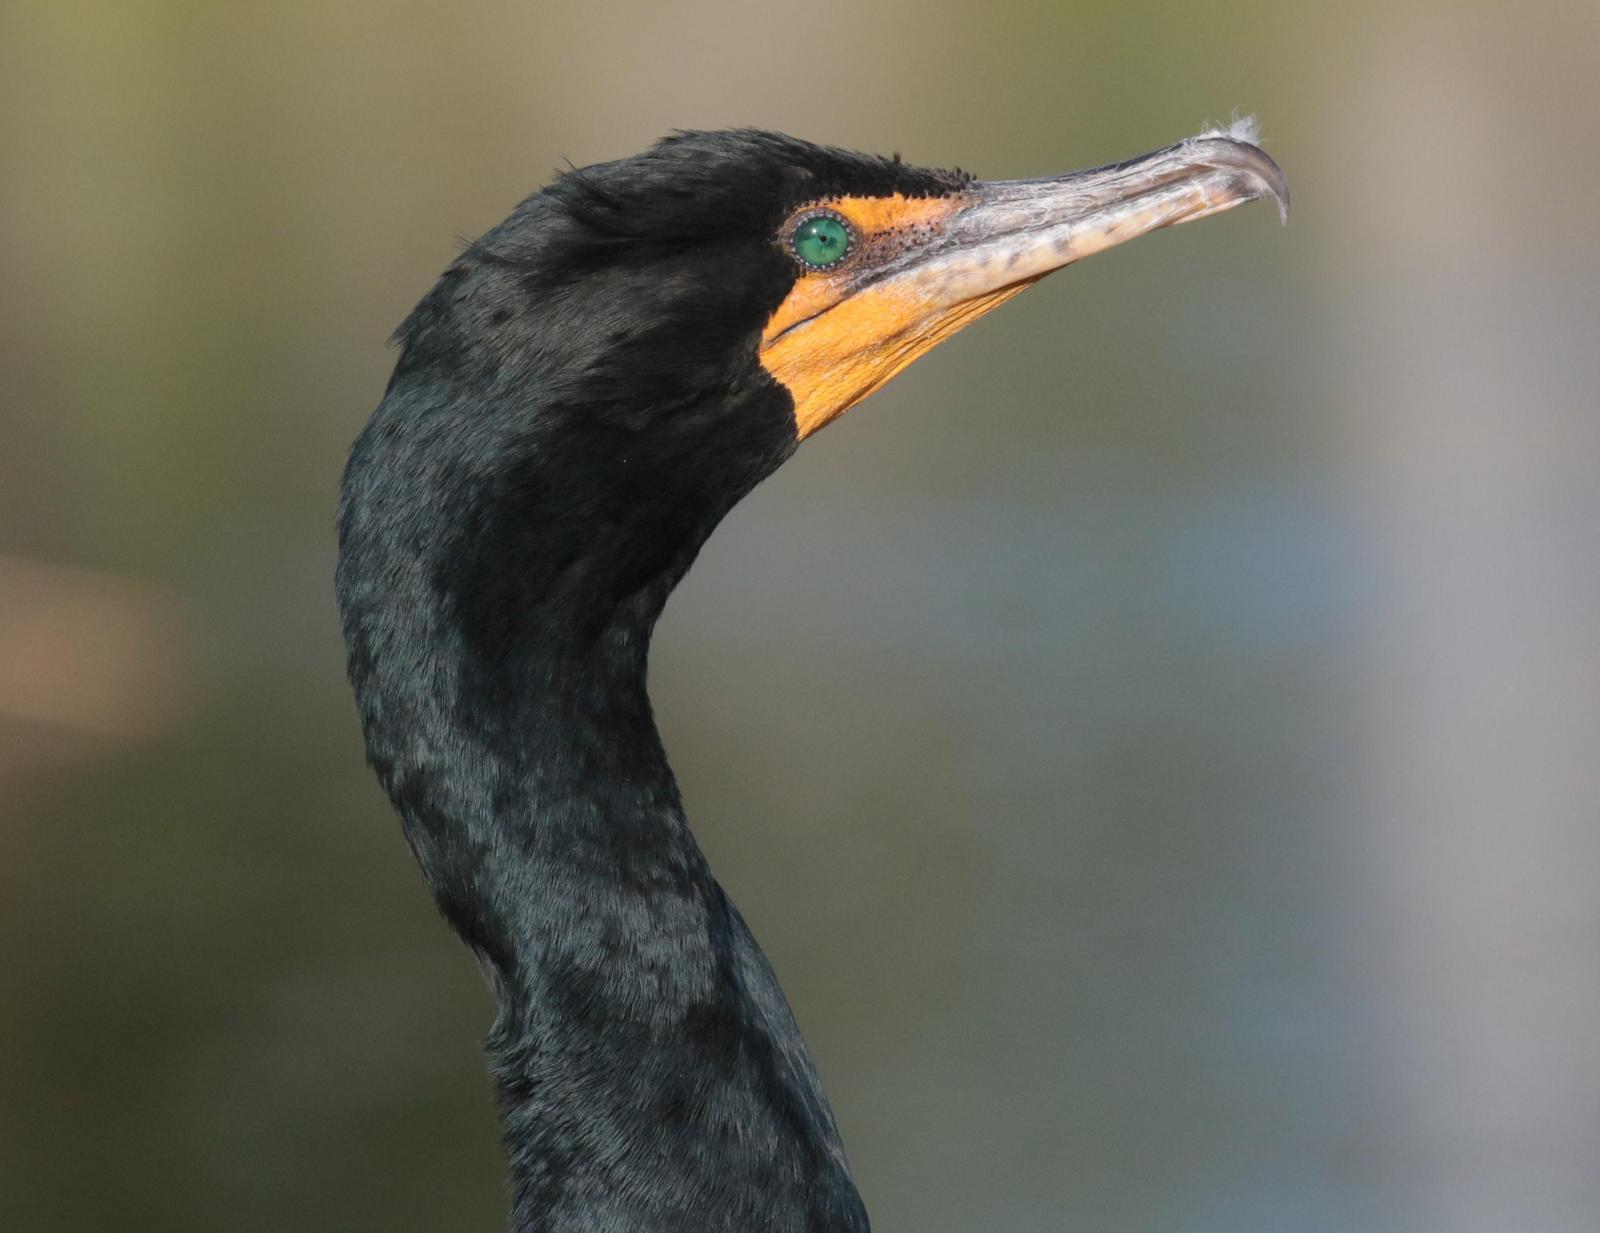 Double-crested Cormorant Photo by Karin Kirchhoff